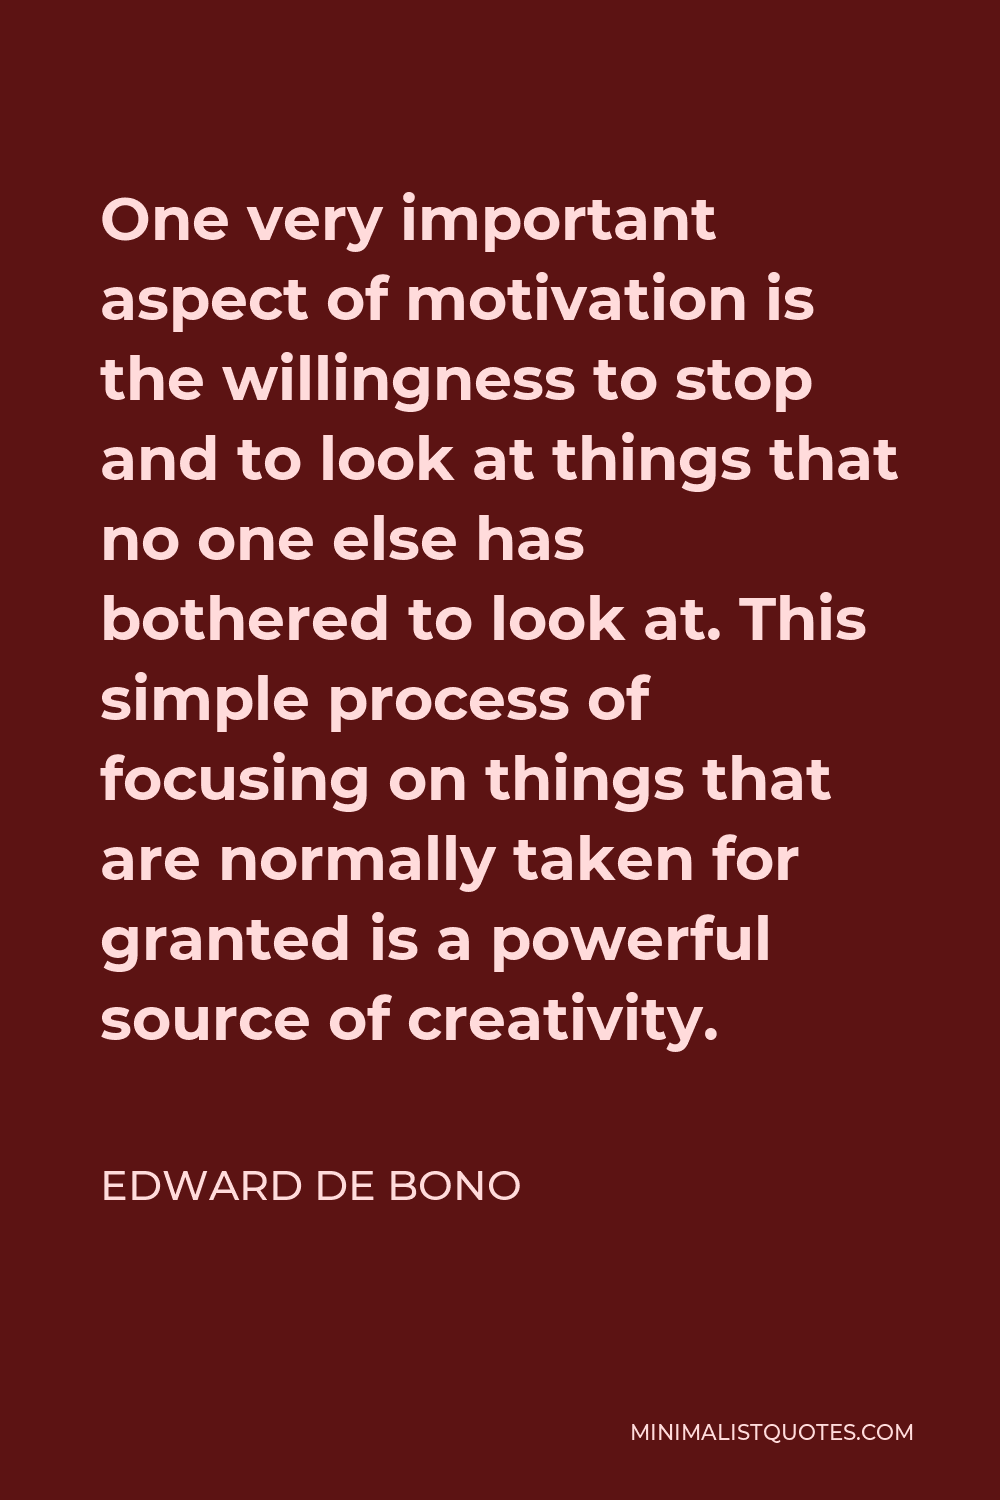 Edward de Bono Quote - One very important aspect of motivation is the willingness to stop and to look at things that no one else has bothered to look at. This simple process of focusing on things that are normally taken for granted is a powerful source of creativity.